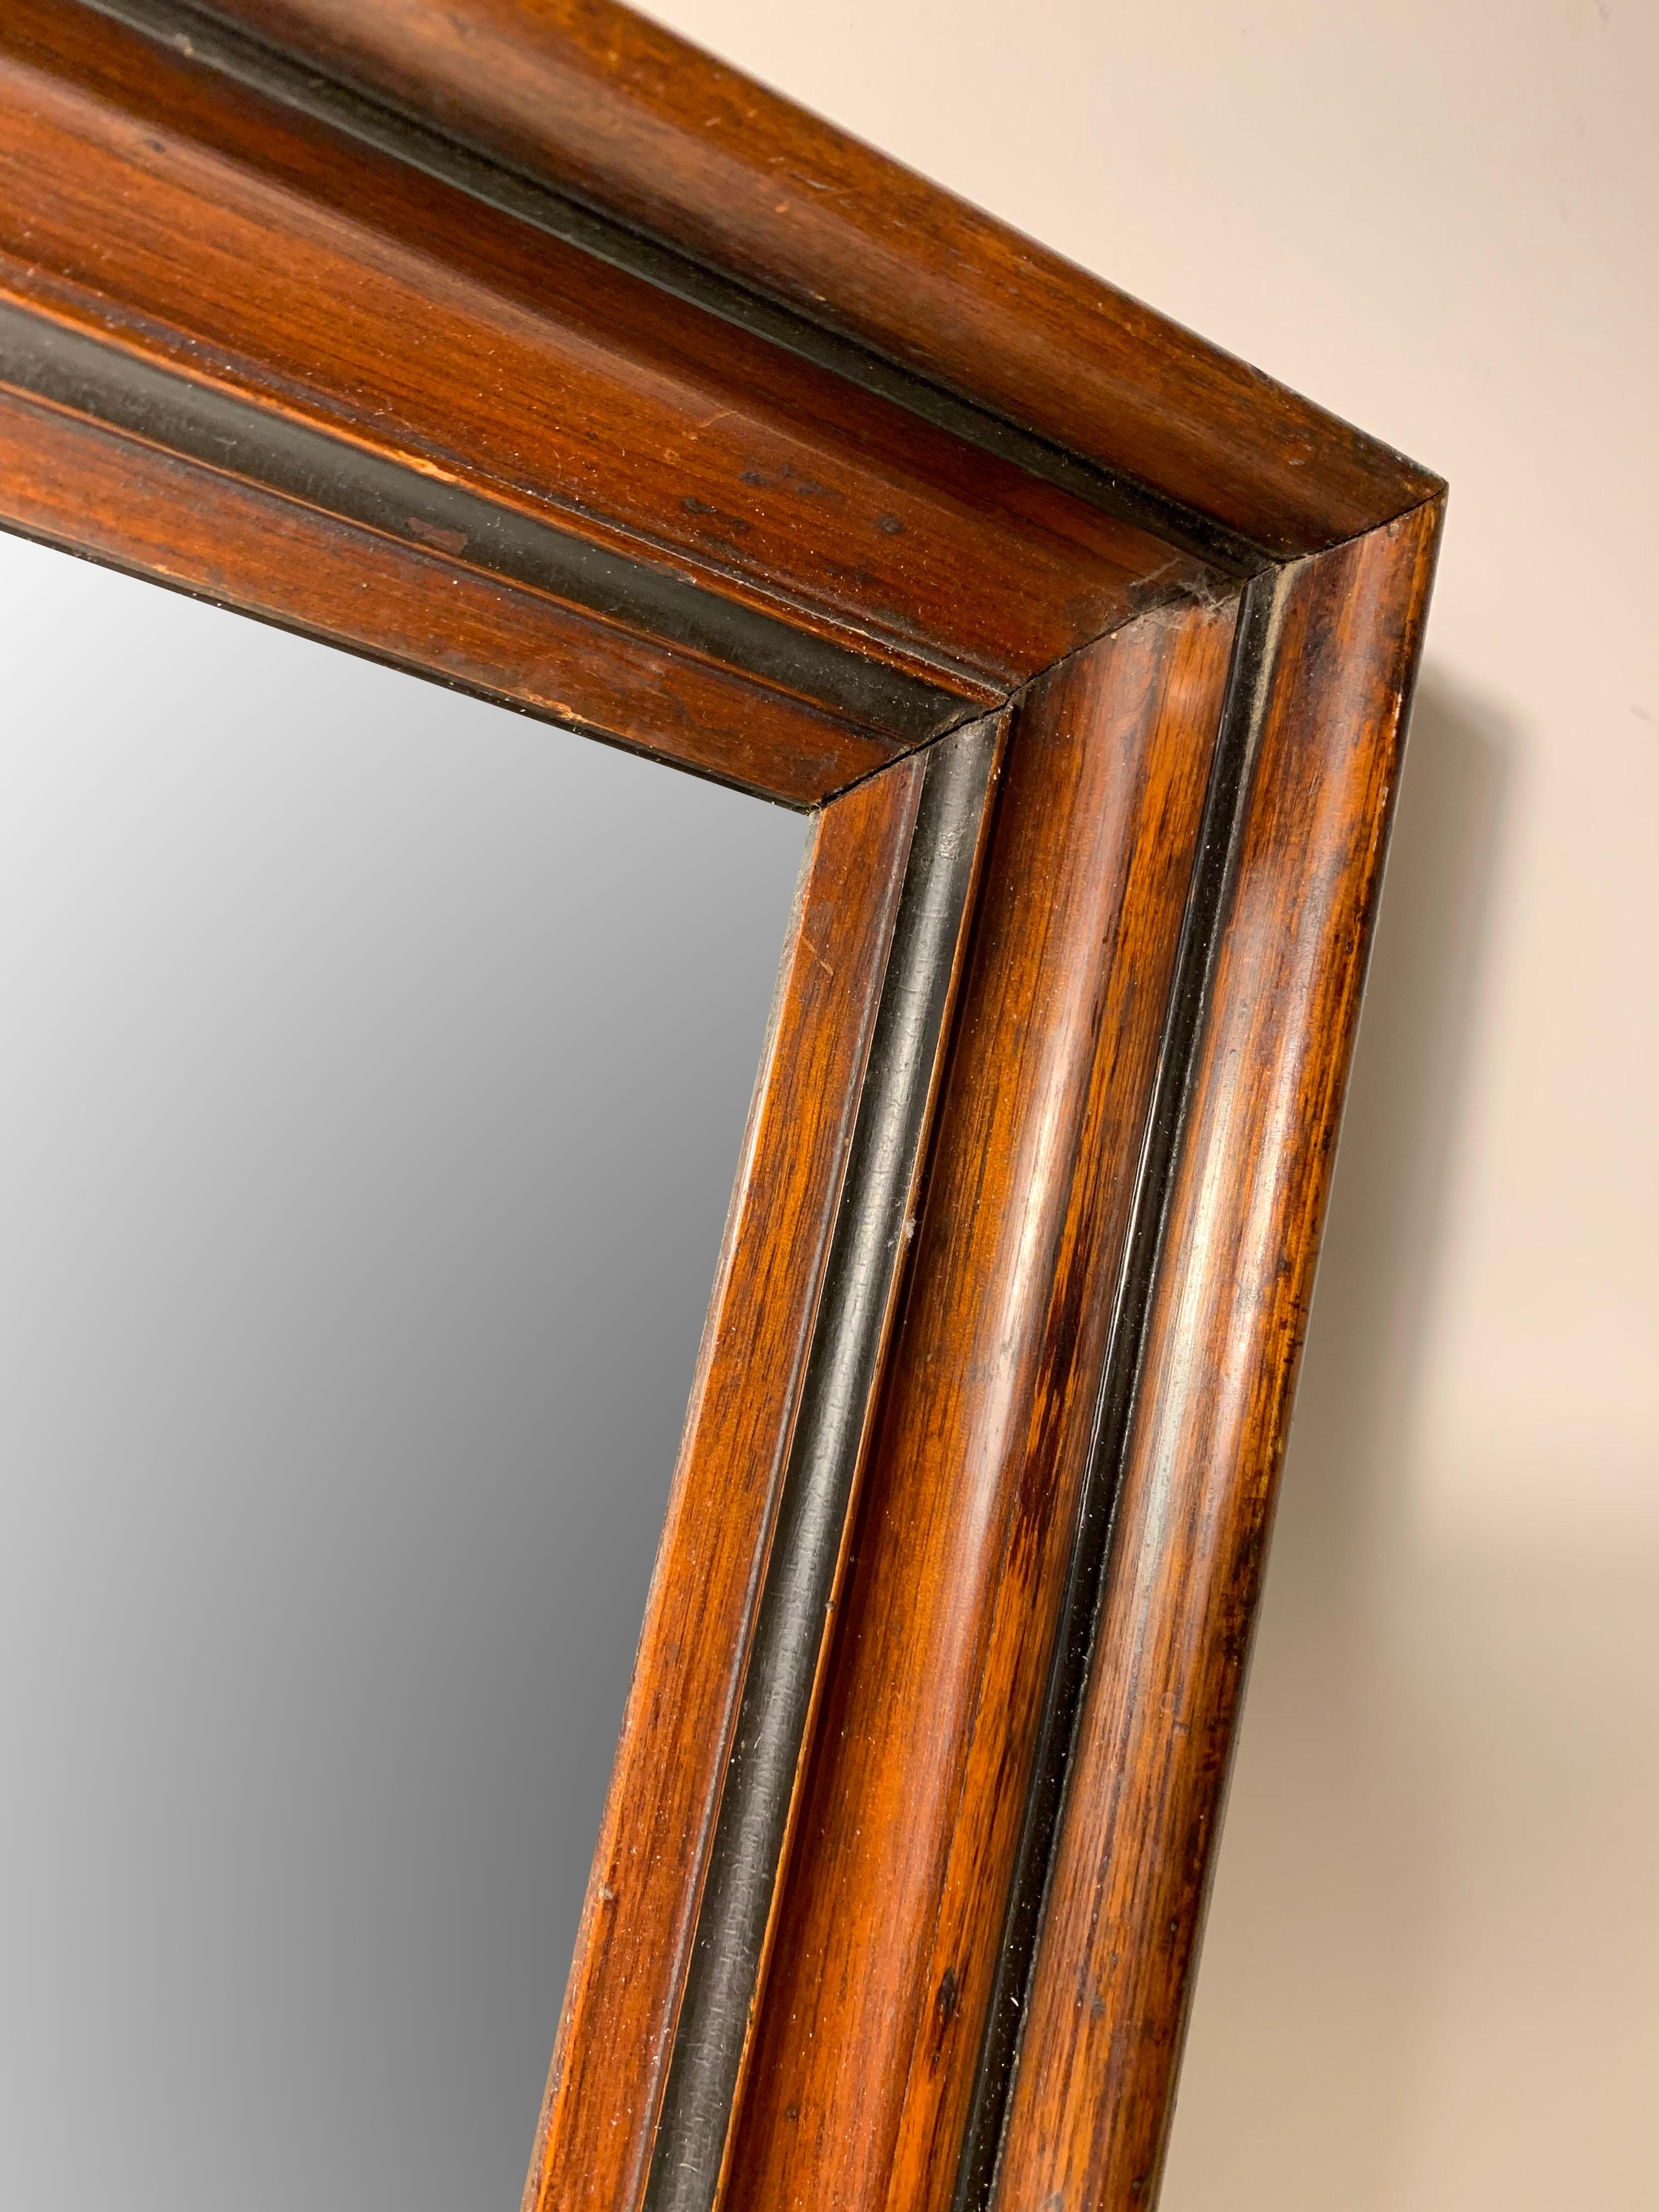 Wood Antique 19th Century Victorian Ebonized Banding Mirror / Frame For Sale